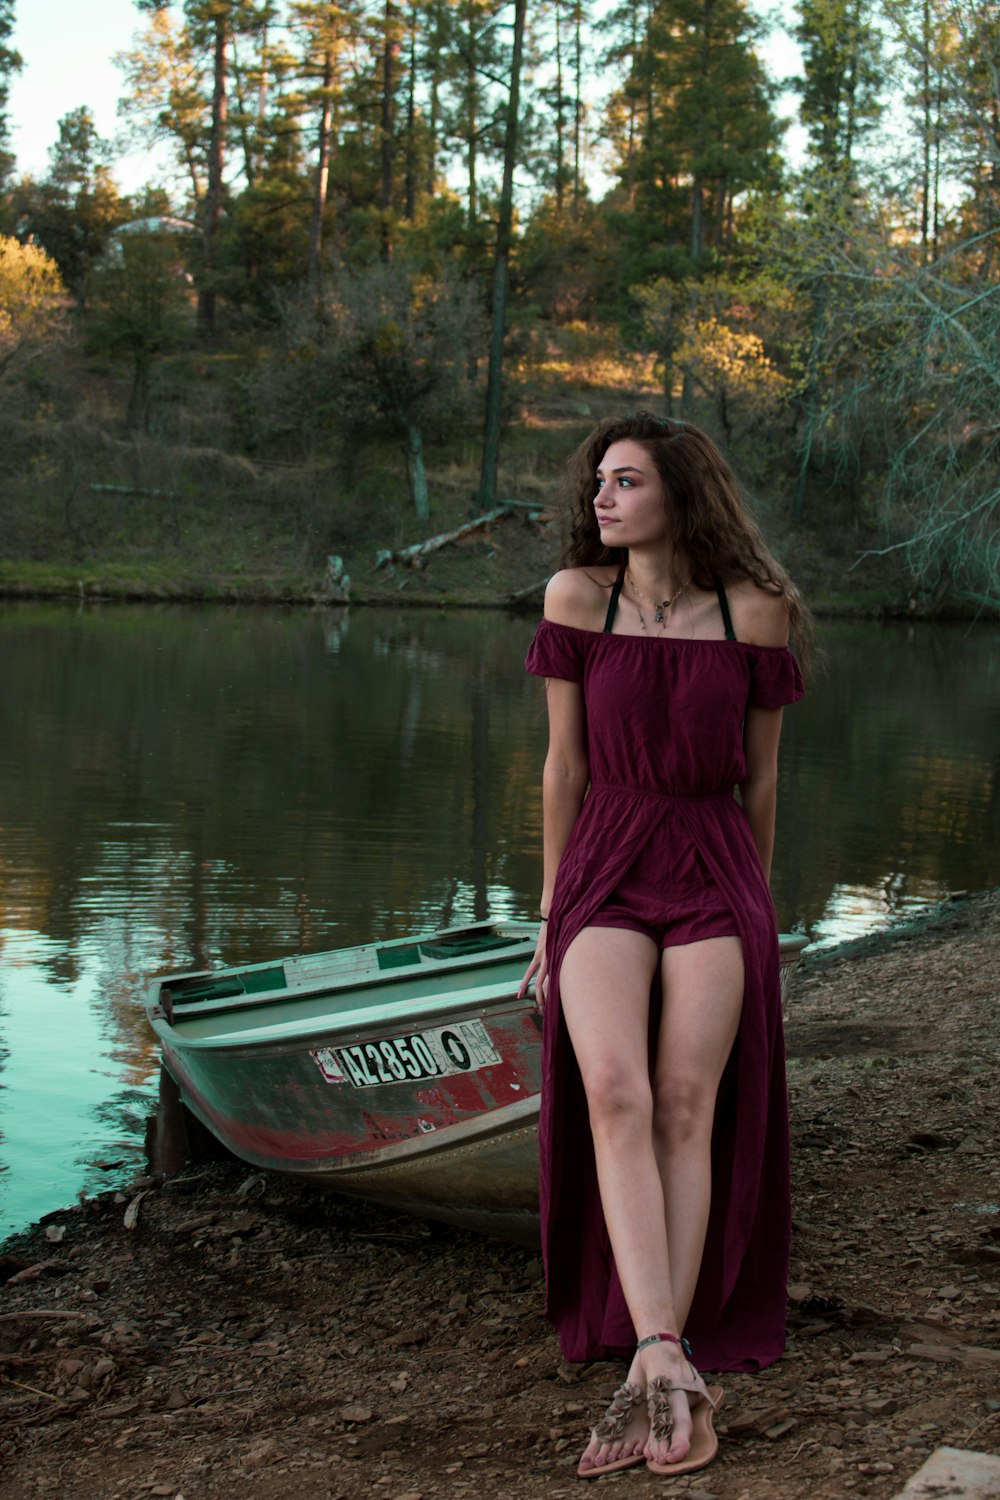 woman in maroon dress sitting on boat at lake shore